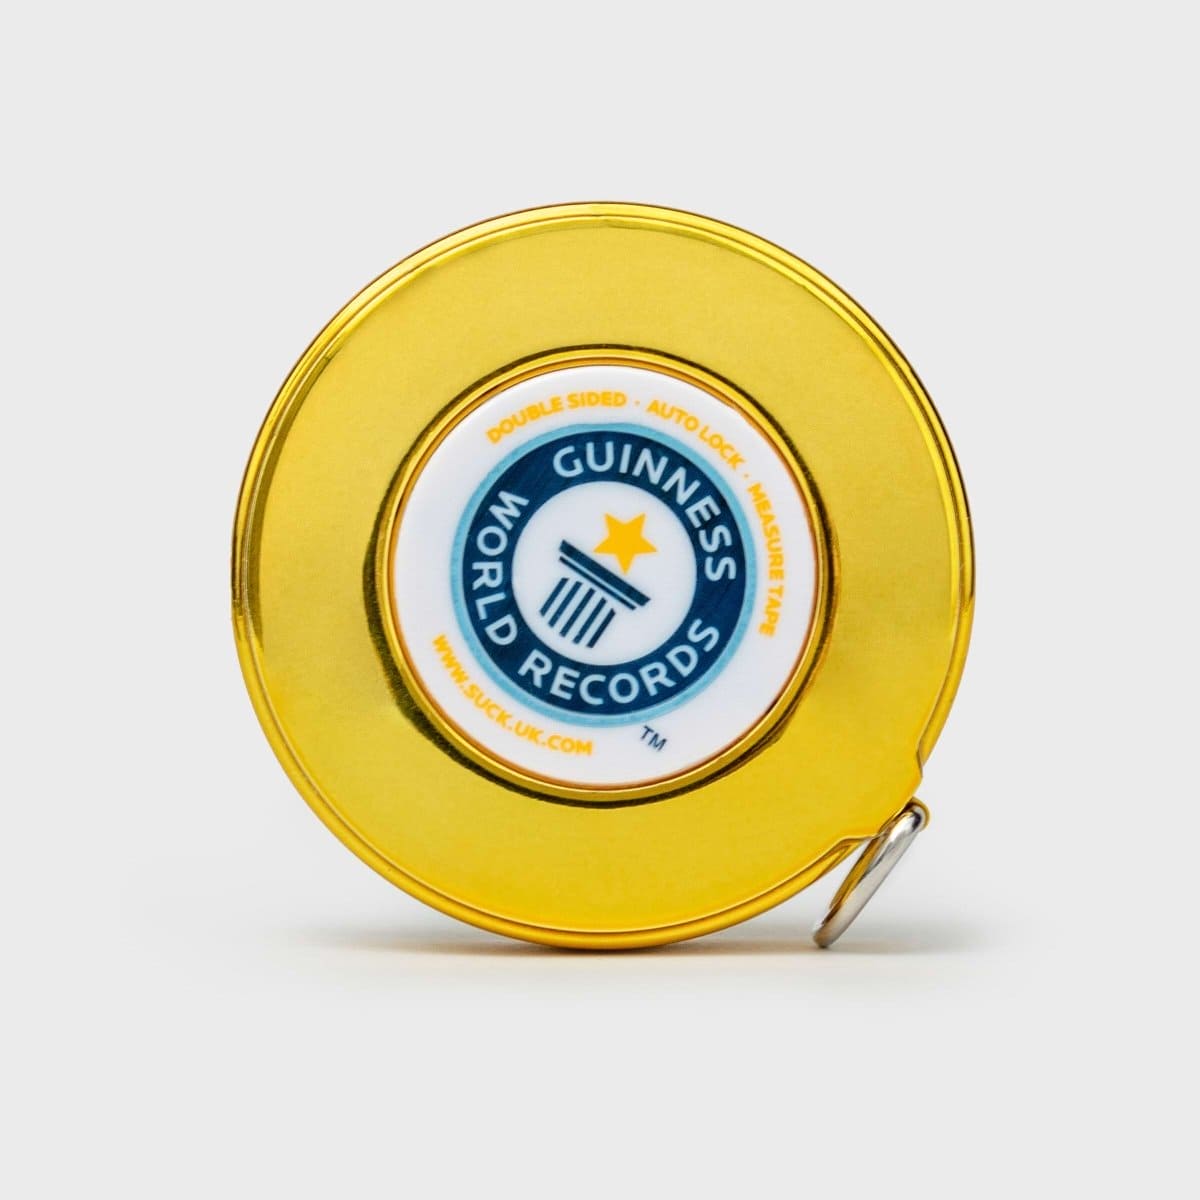 World Records Tape Measure 3M, Guinness Book of Records Facts - World Records Tape Measure by Luckies